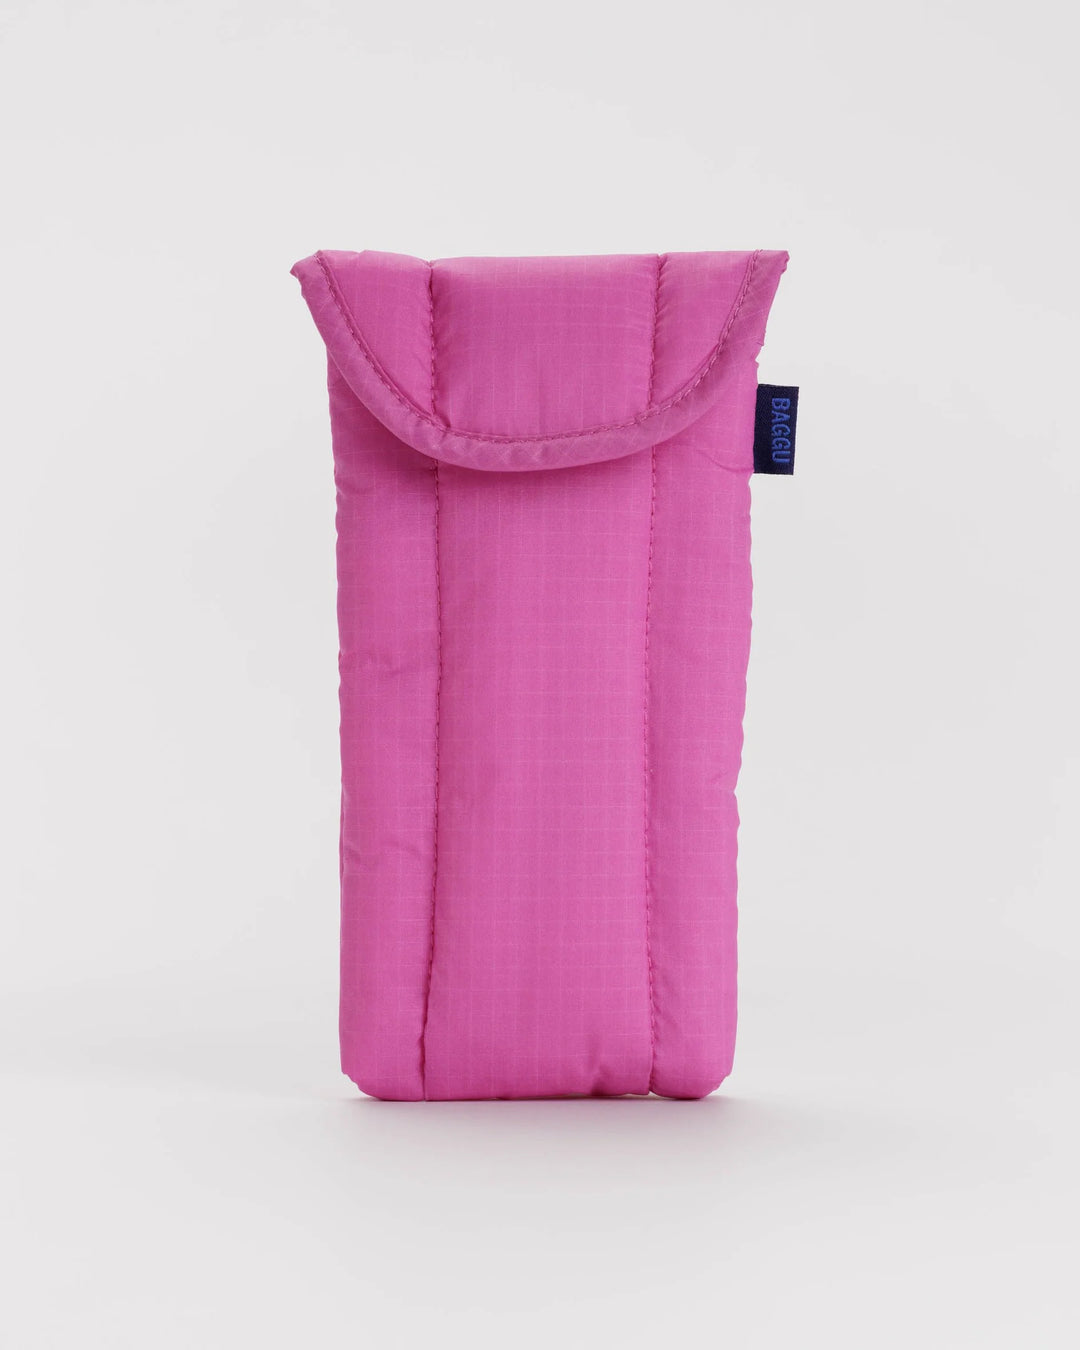 Baggu - Puffy Glasses Case - Extra Pink